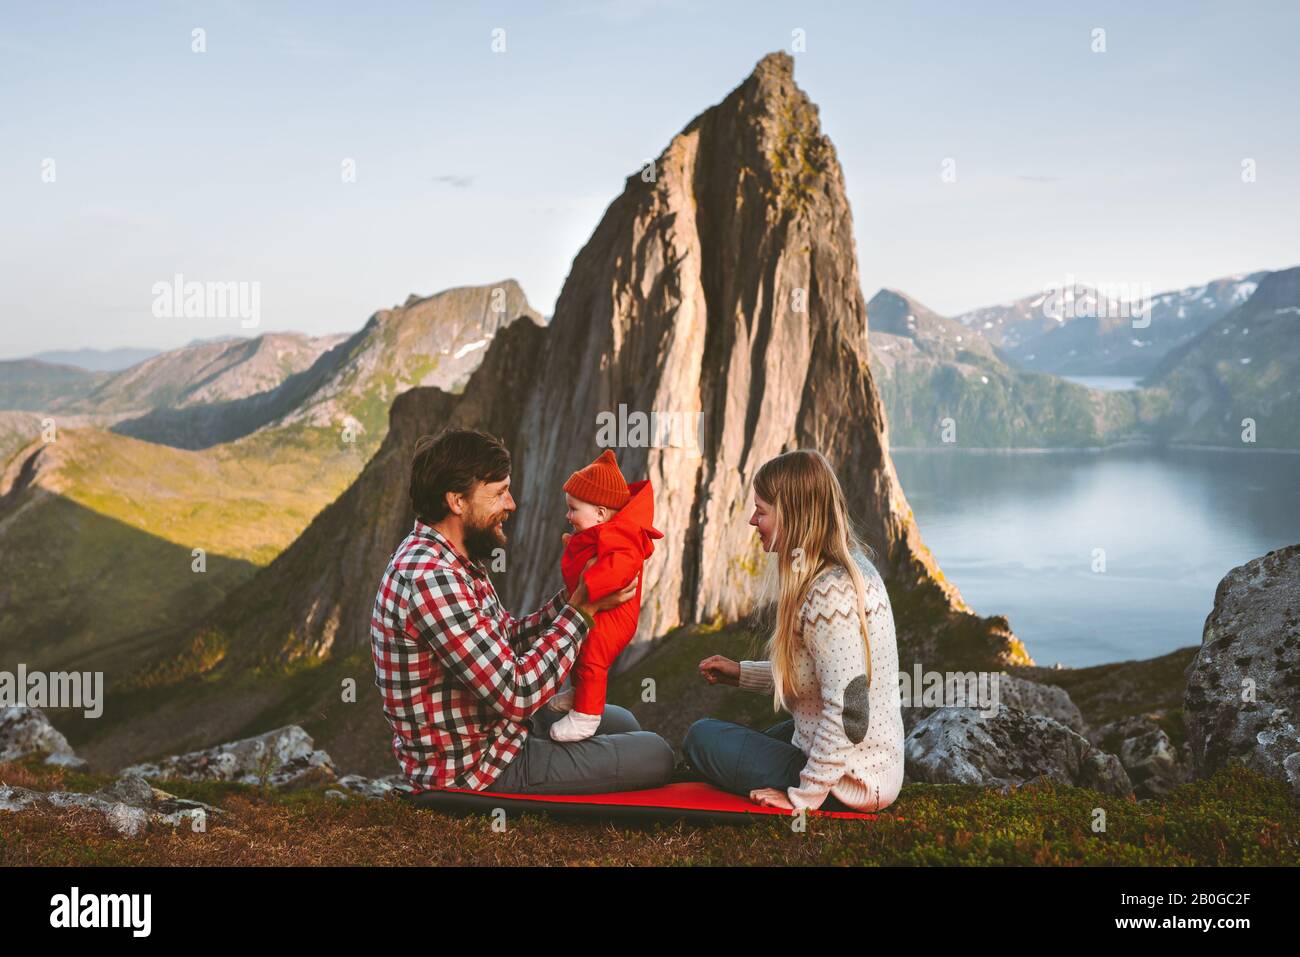 Travel family mother and father with baby outdoor camping healthy lifestyle Segla mountain view sustainable tourism in Norway man and woman with child Stock Photo